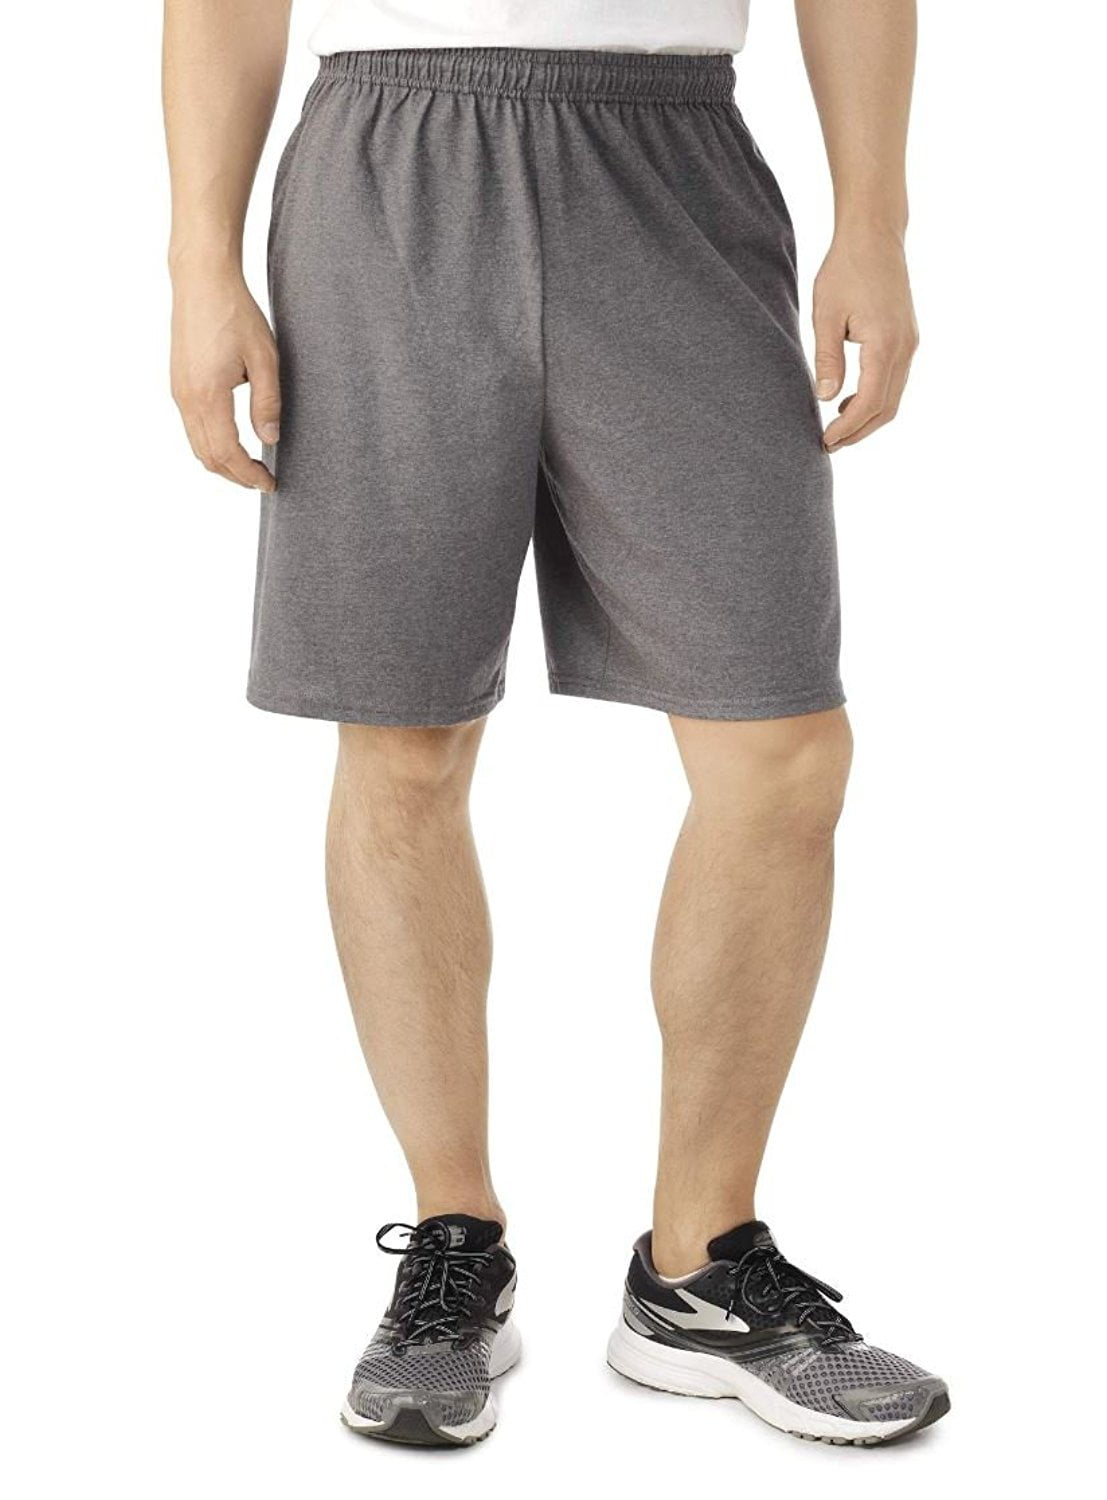 Fruit of the Loom Men's Jersey Shorts 